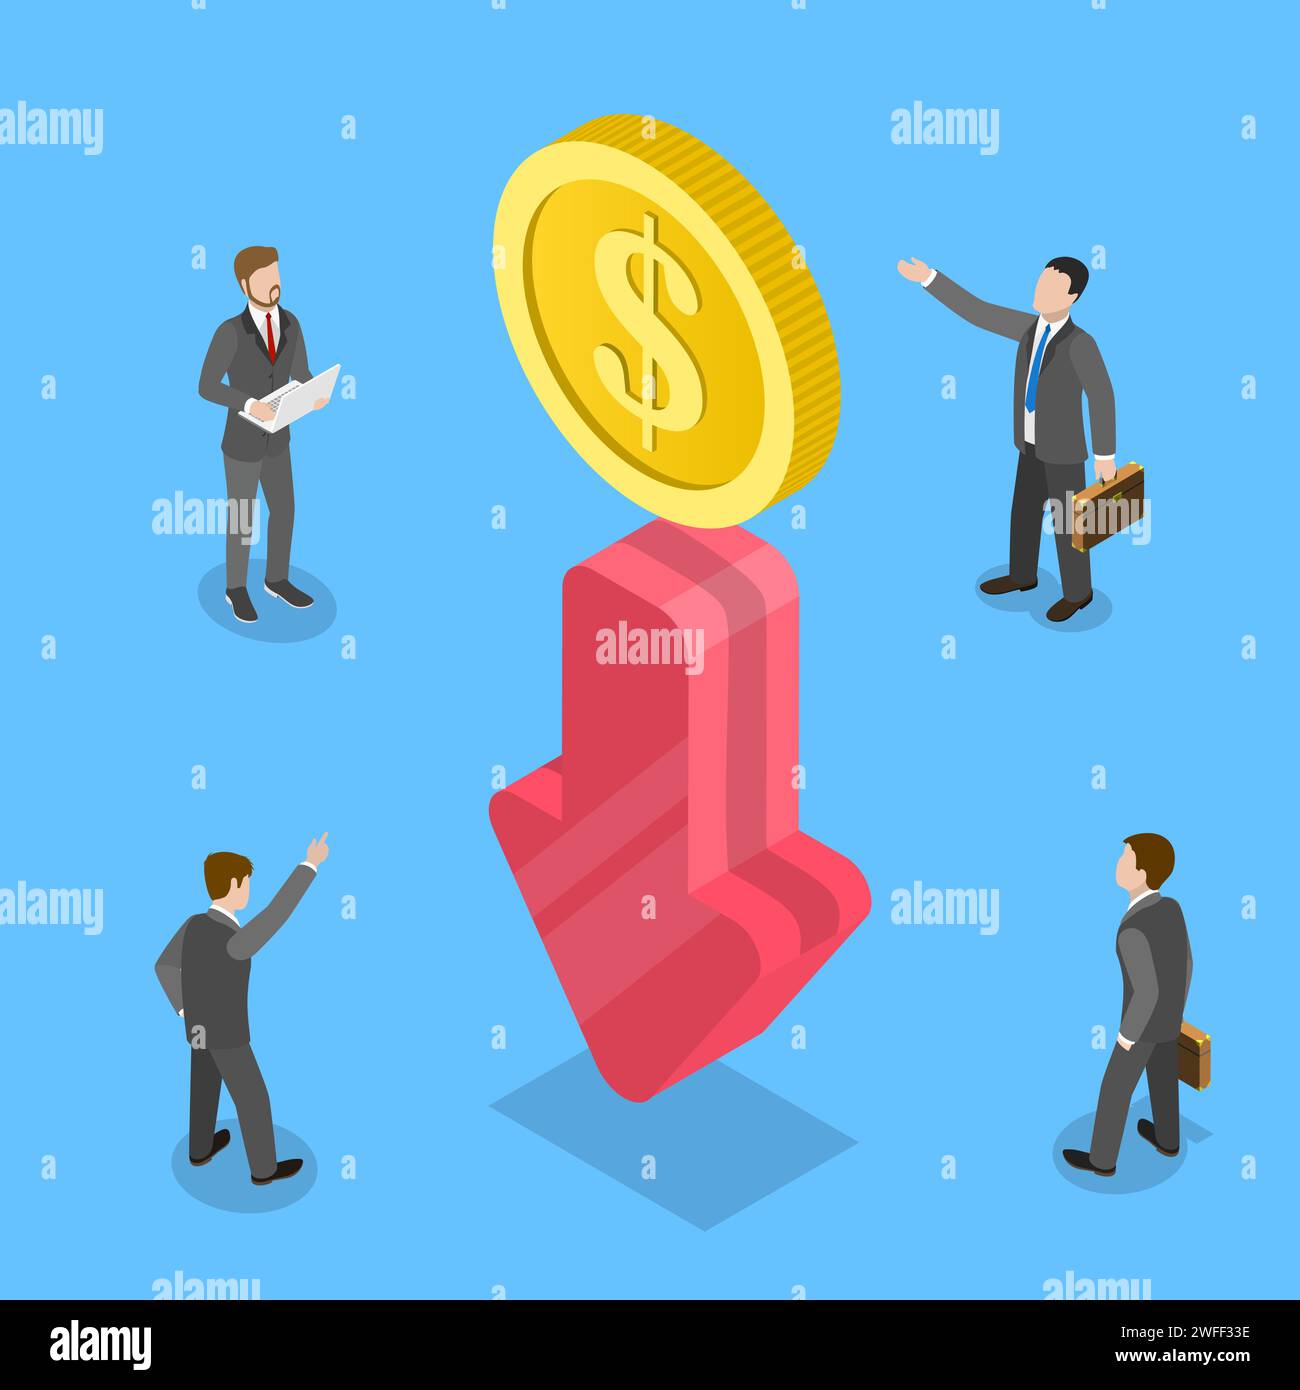 3D Isometric Flat Vector Concept of Financial Crisis, Cost Reduction, Dollar Rate Decrease, Price Minimising, Falling Rate of Profit, Economic Lockdow Stock Vector